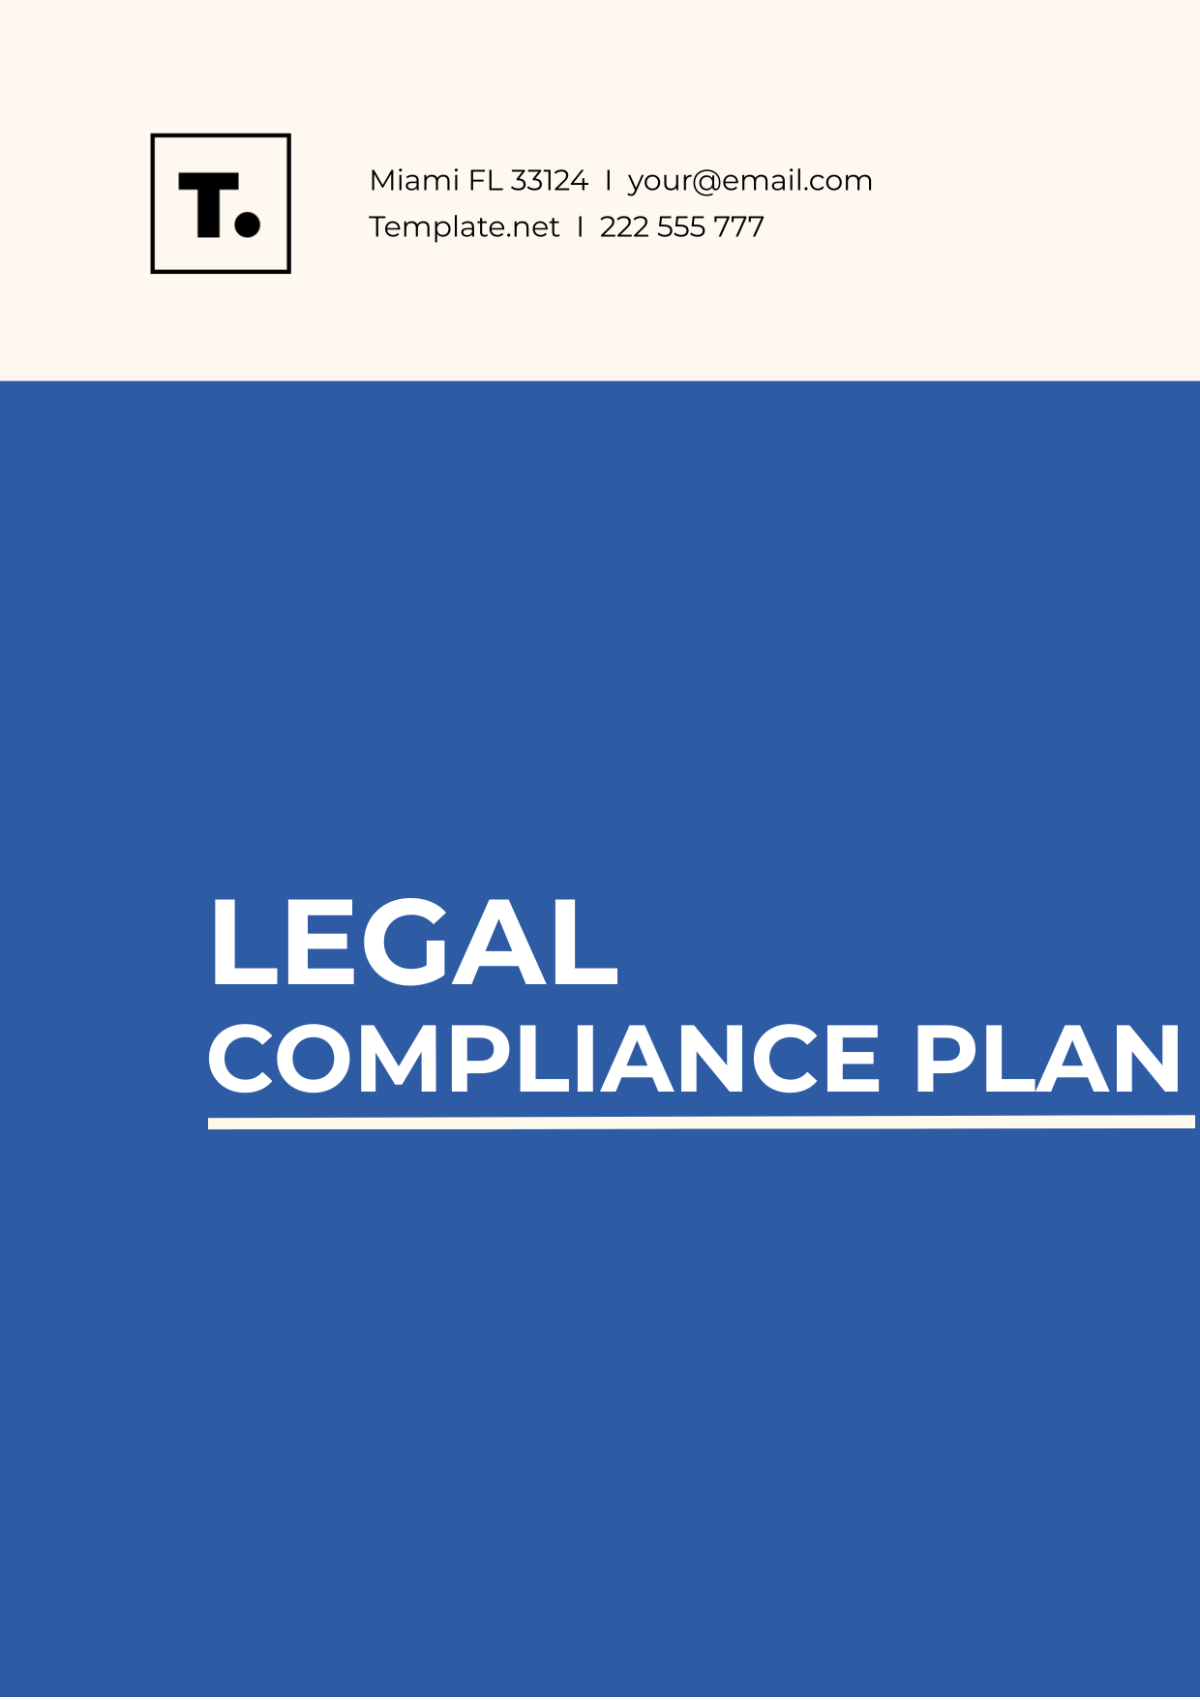 Free Legal Compliance Plan Template